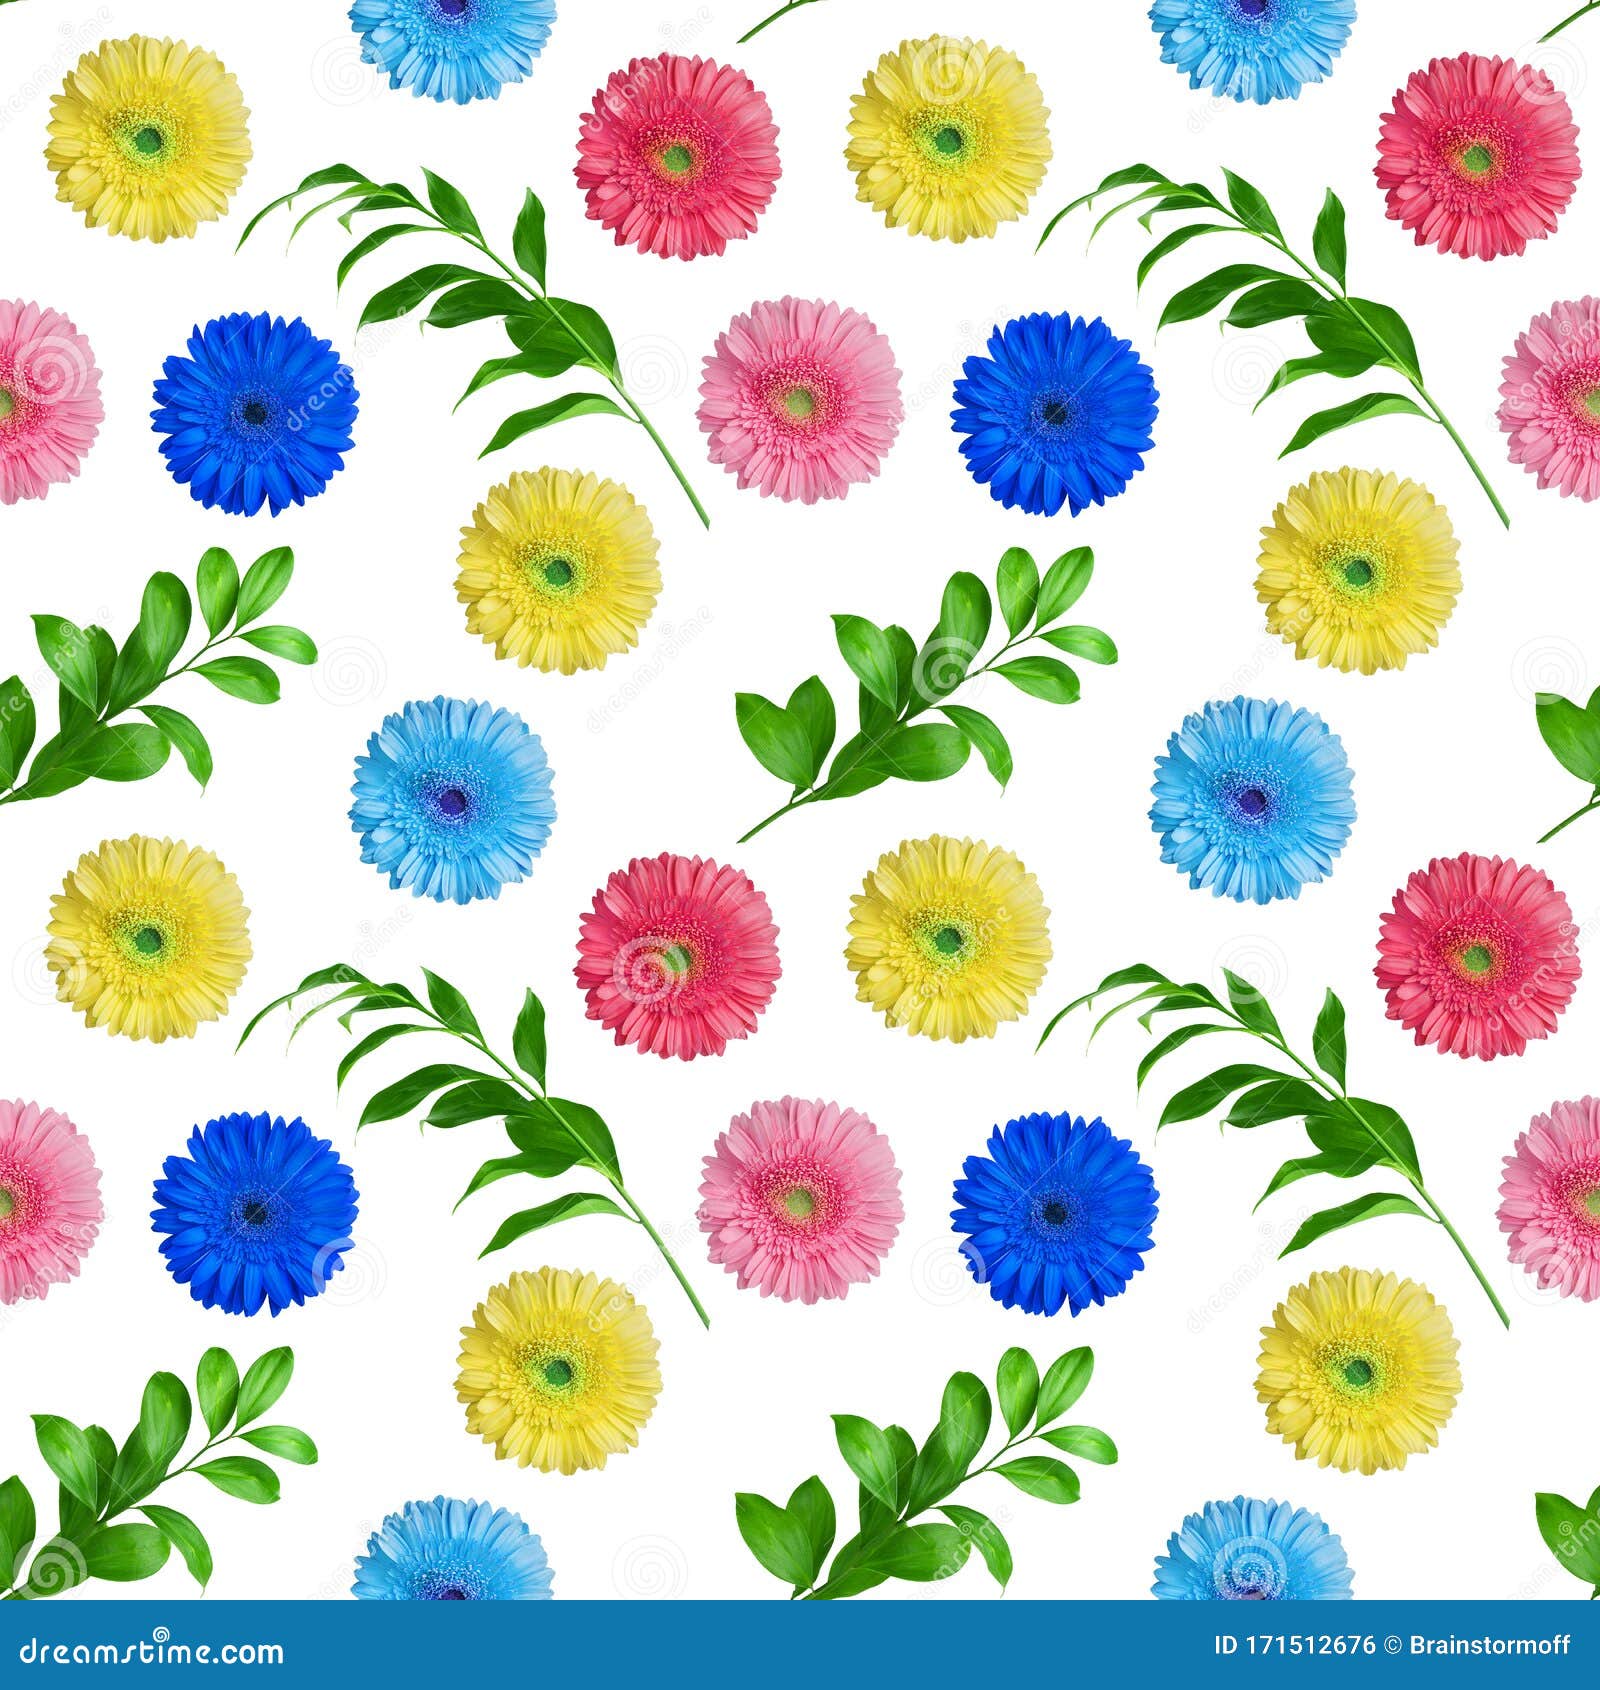 seamless pattern of colorful gerbera flowers and green leaves on white background , multi-colored daisy flower ornament